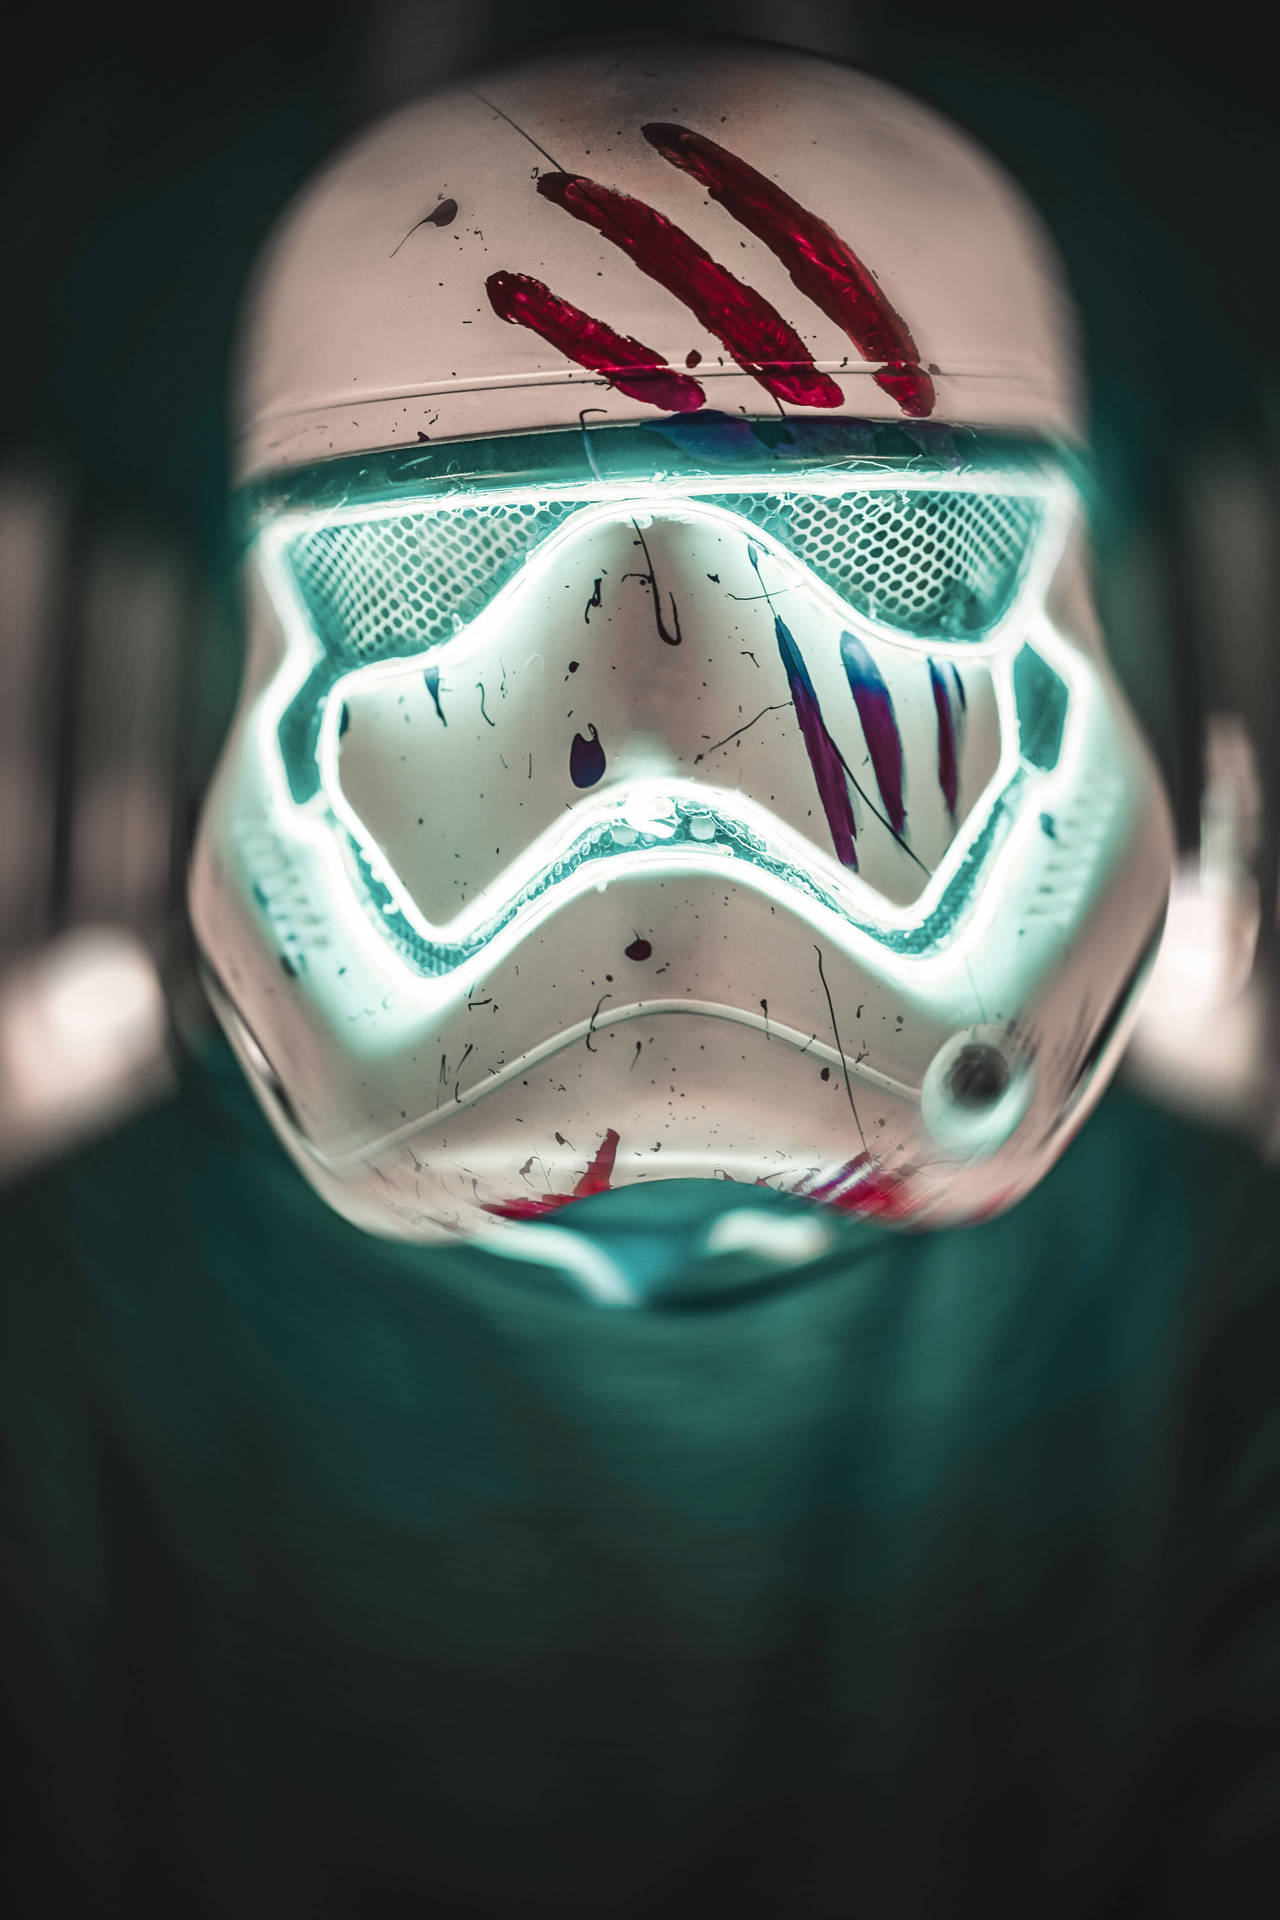 Stormtrooper 3813X5719 Wallpaper and Background Image